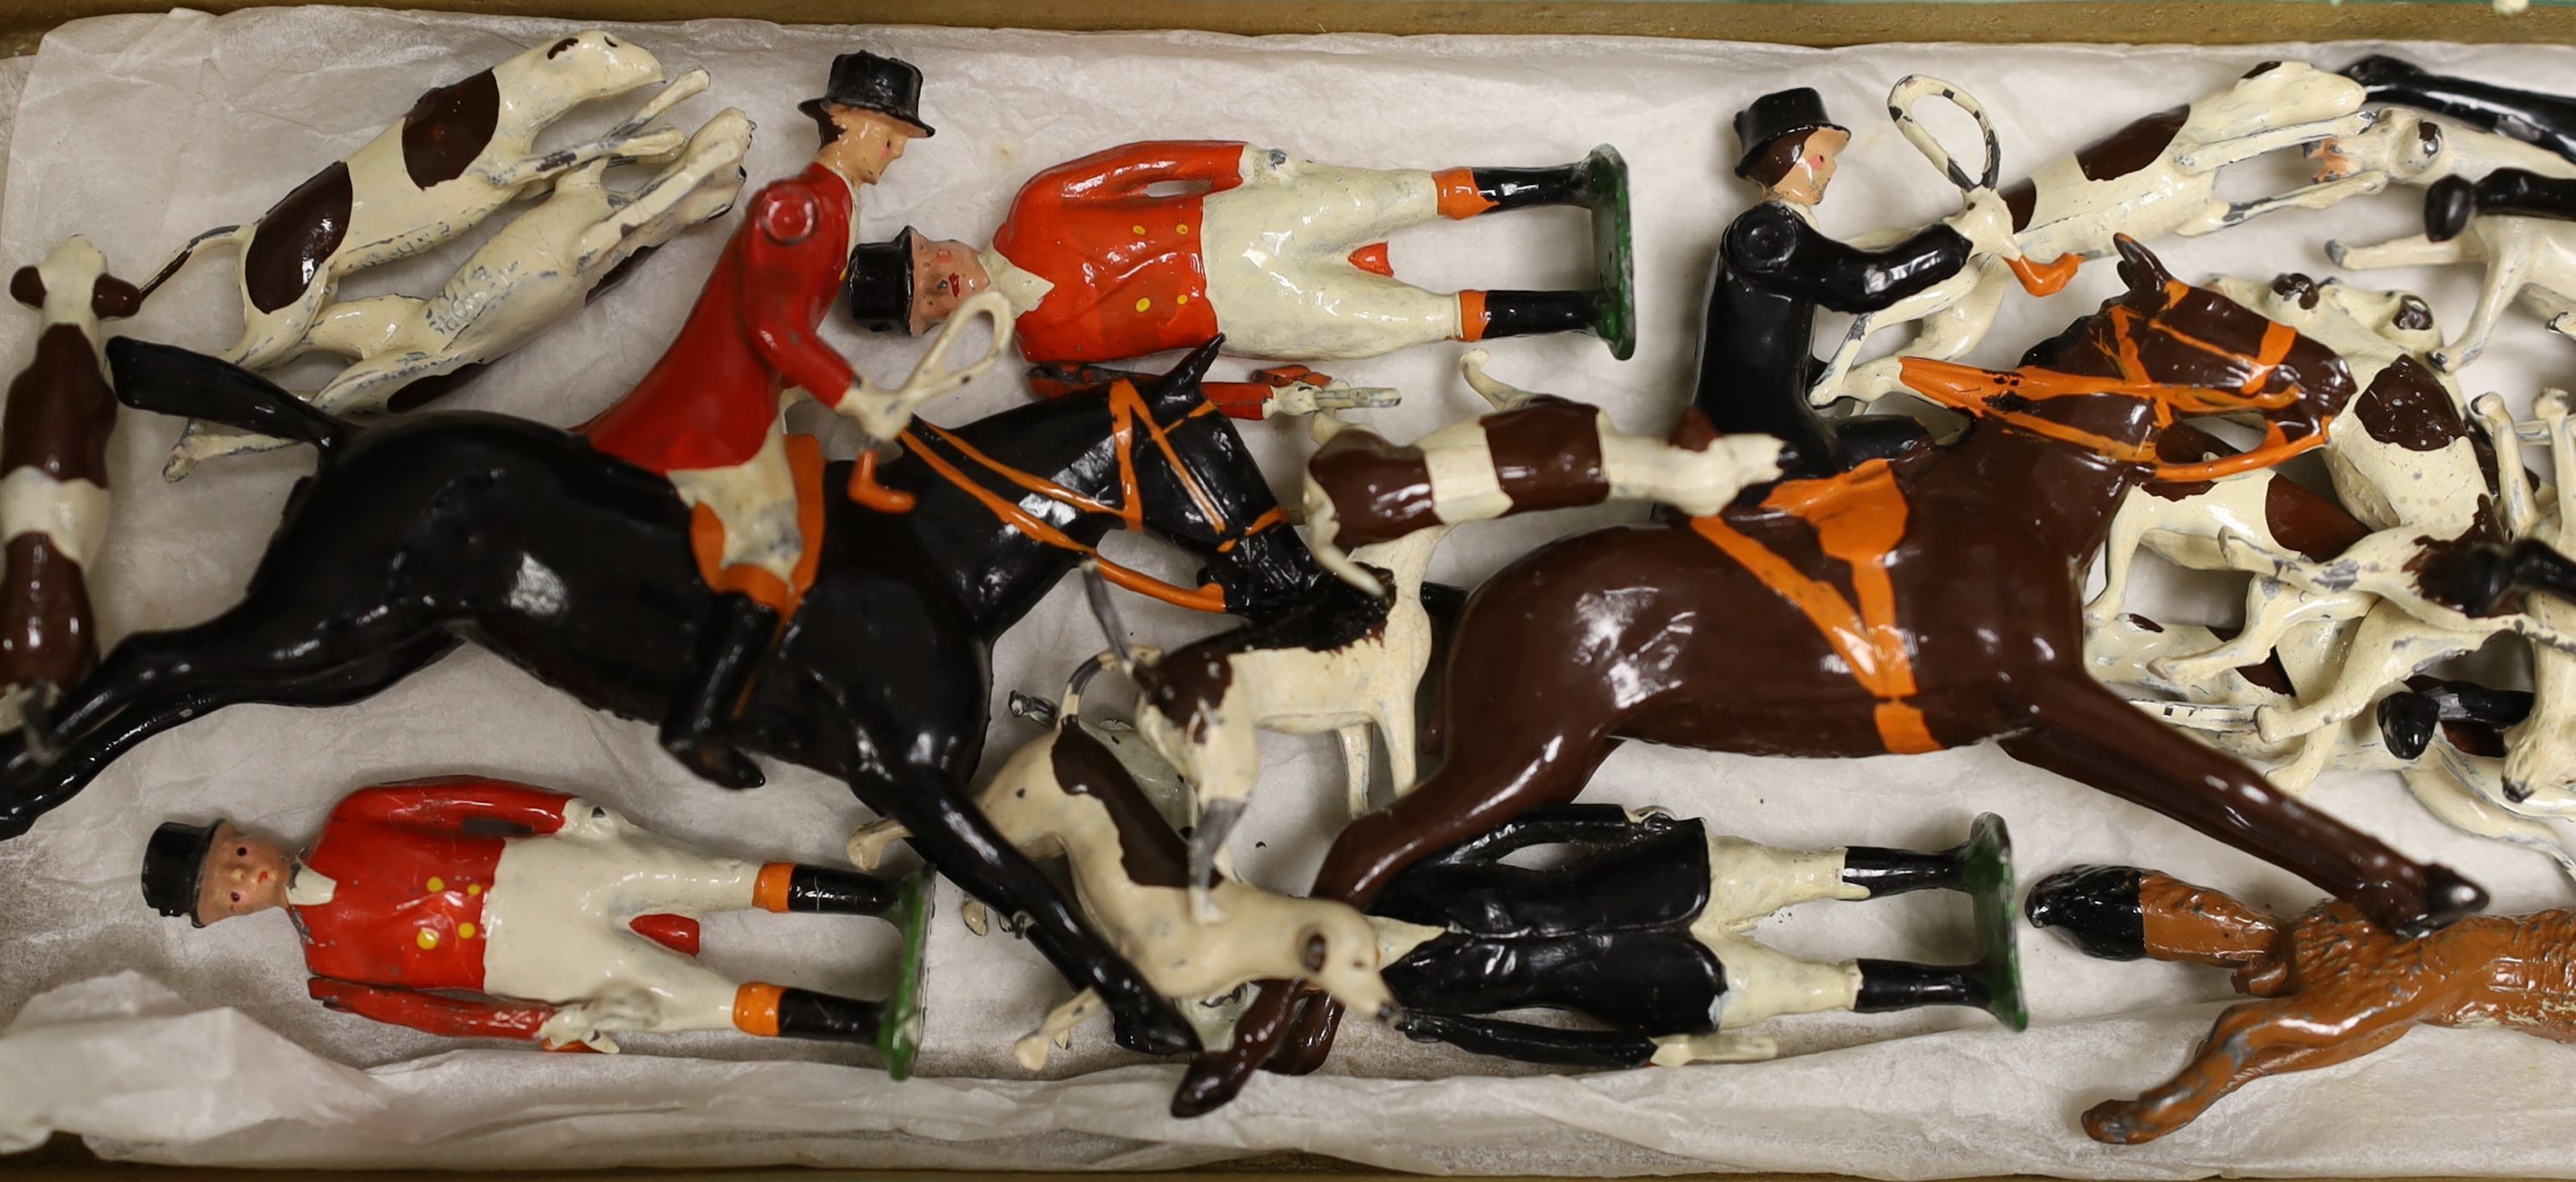 Britains farmyard animals and a box of model hunting series, zoo animals etc - Image 4 of 6